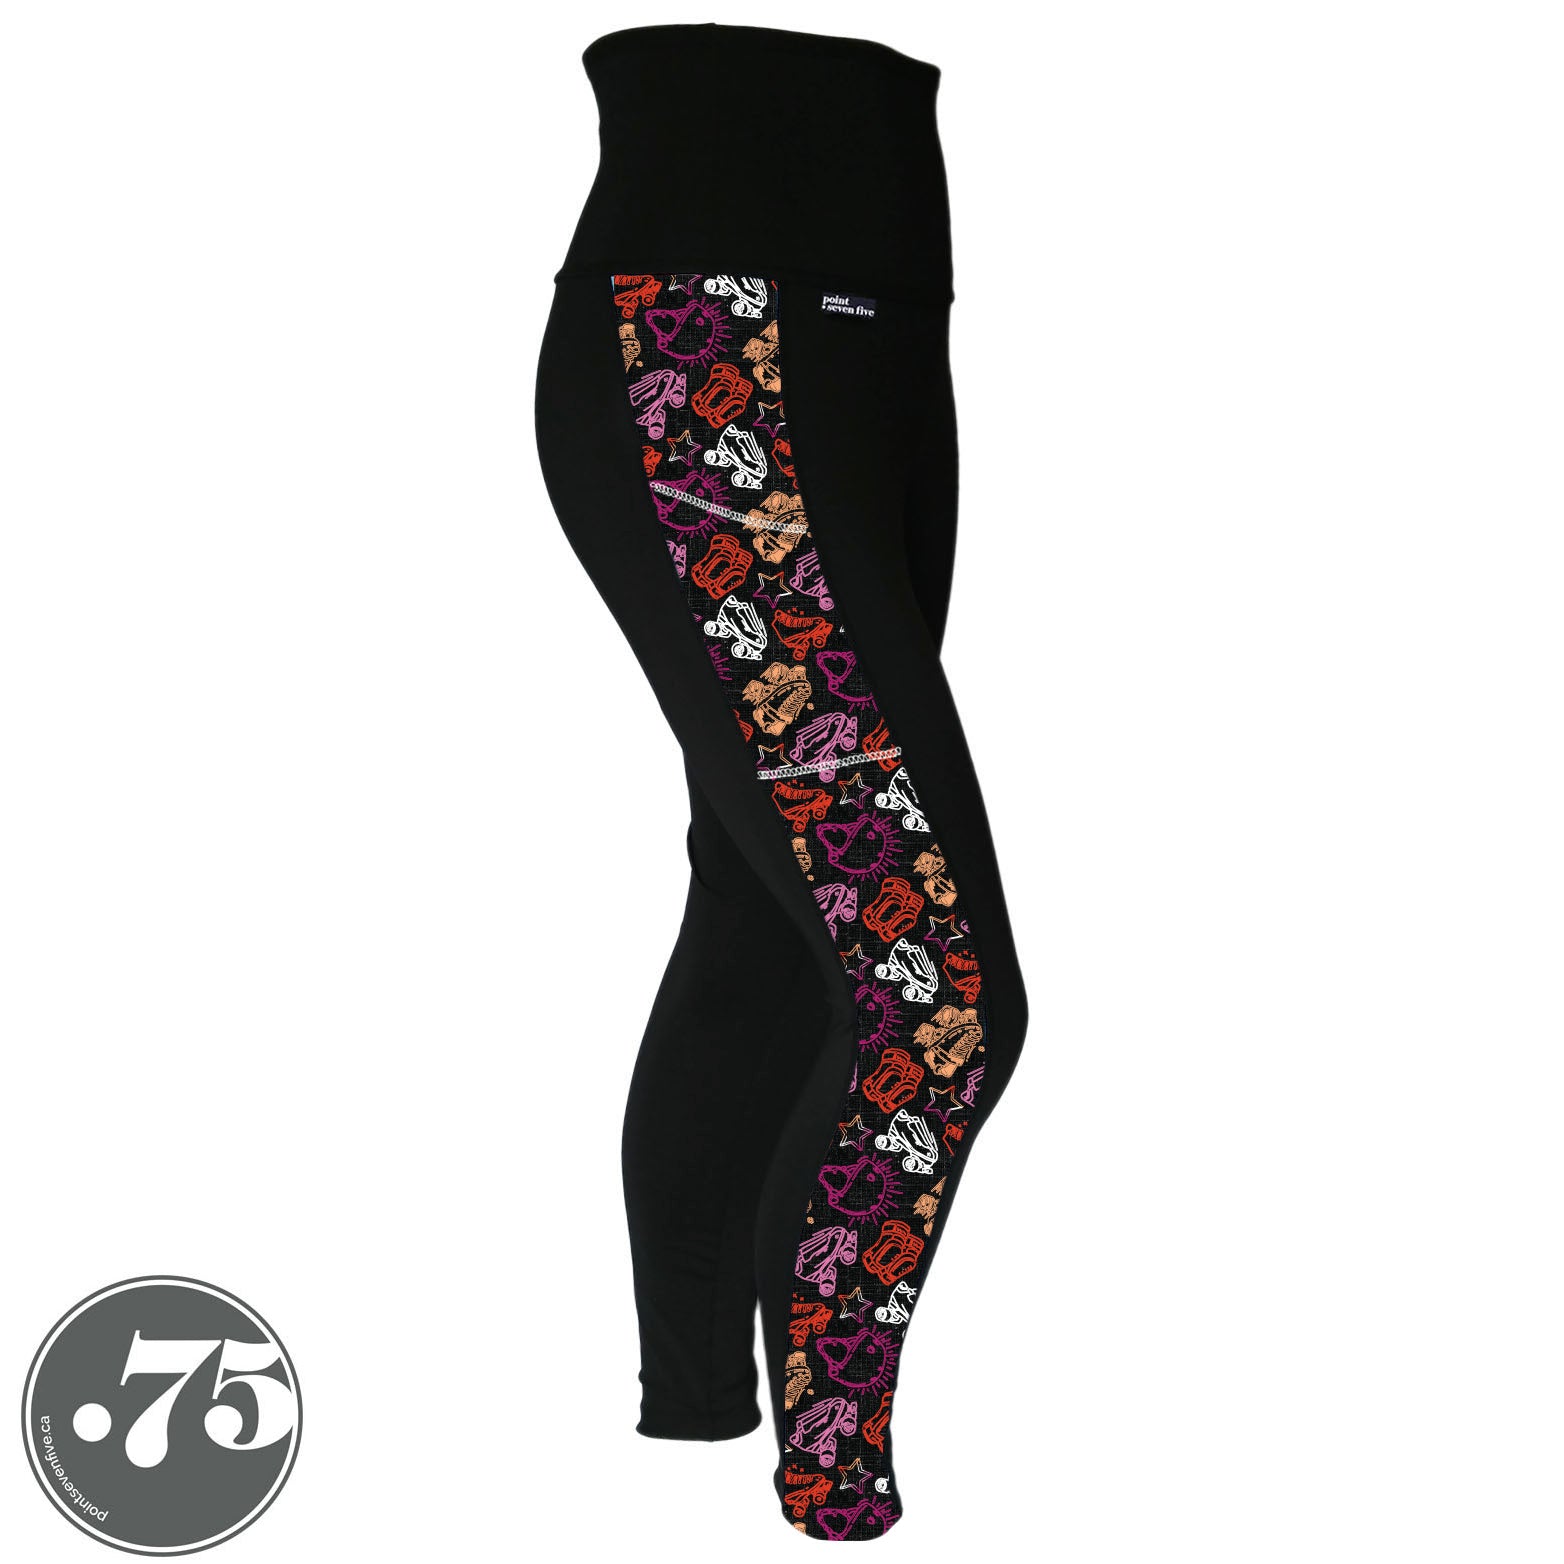 A pair of black spandex leggings on a mannequin, the leggings have a 3.5” wide stripe down the side that has a printed fabric with rollerskates, helmets, stars & knee pads. The graphics are in the colours of the Lesbian Pride Flag Colours orange, light orange, white, light pink and dark pink.